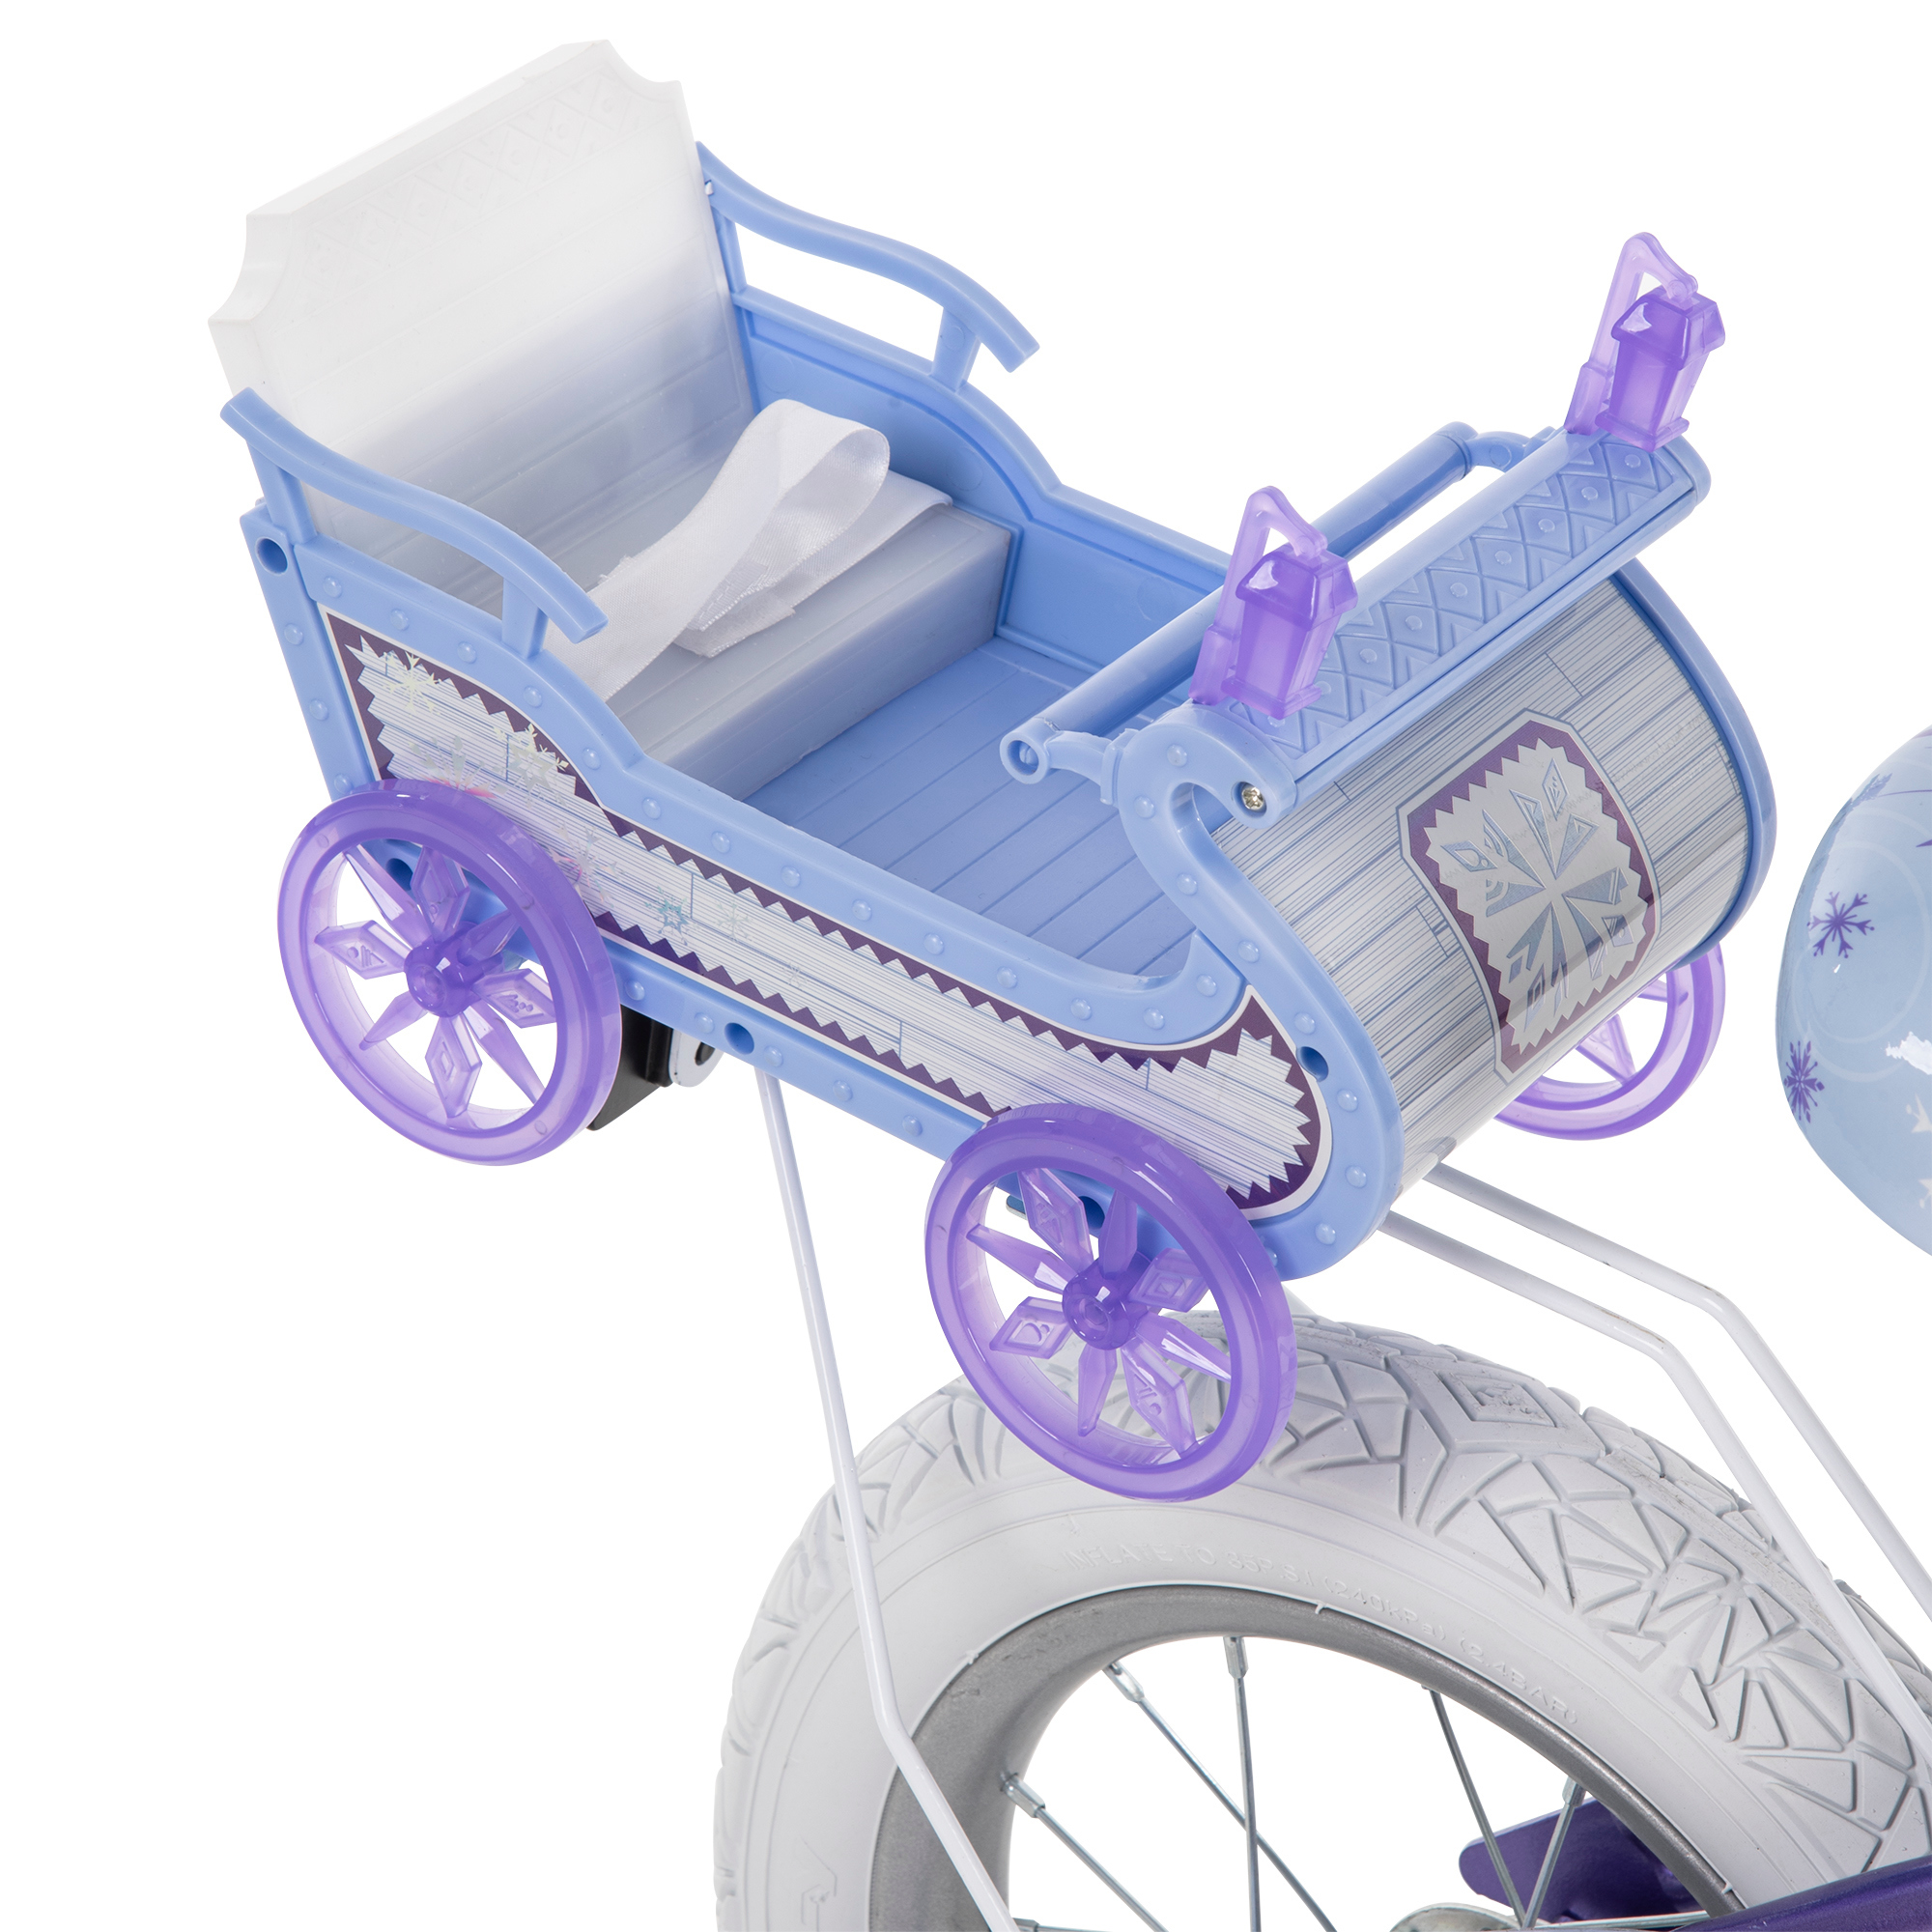 Disney Frozen 12 in. Bike with Doll Carrier Sleigh for Girl's, Ages 2+ Years, White and Purple by Huffy - image 12 of 19